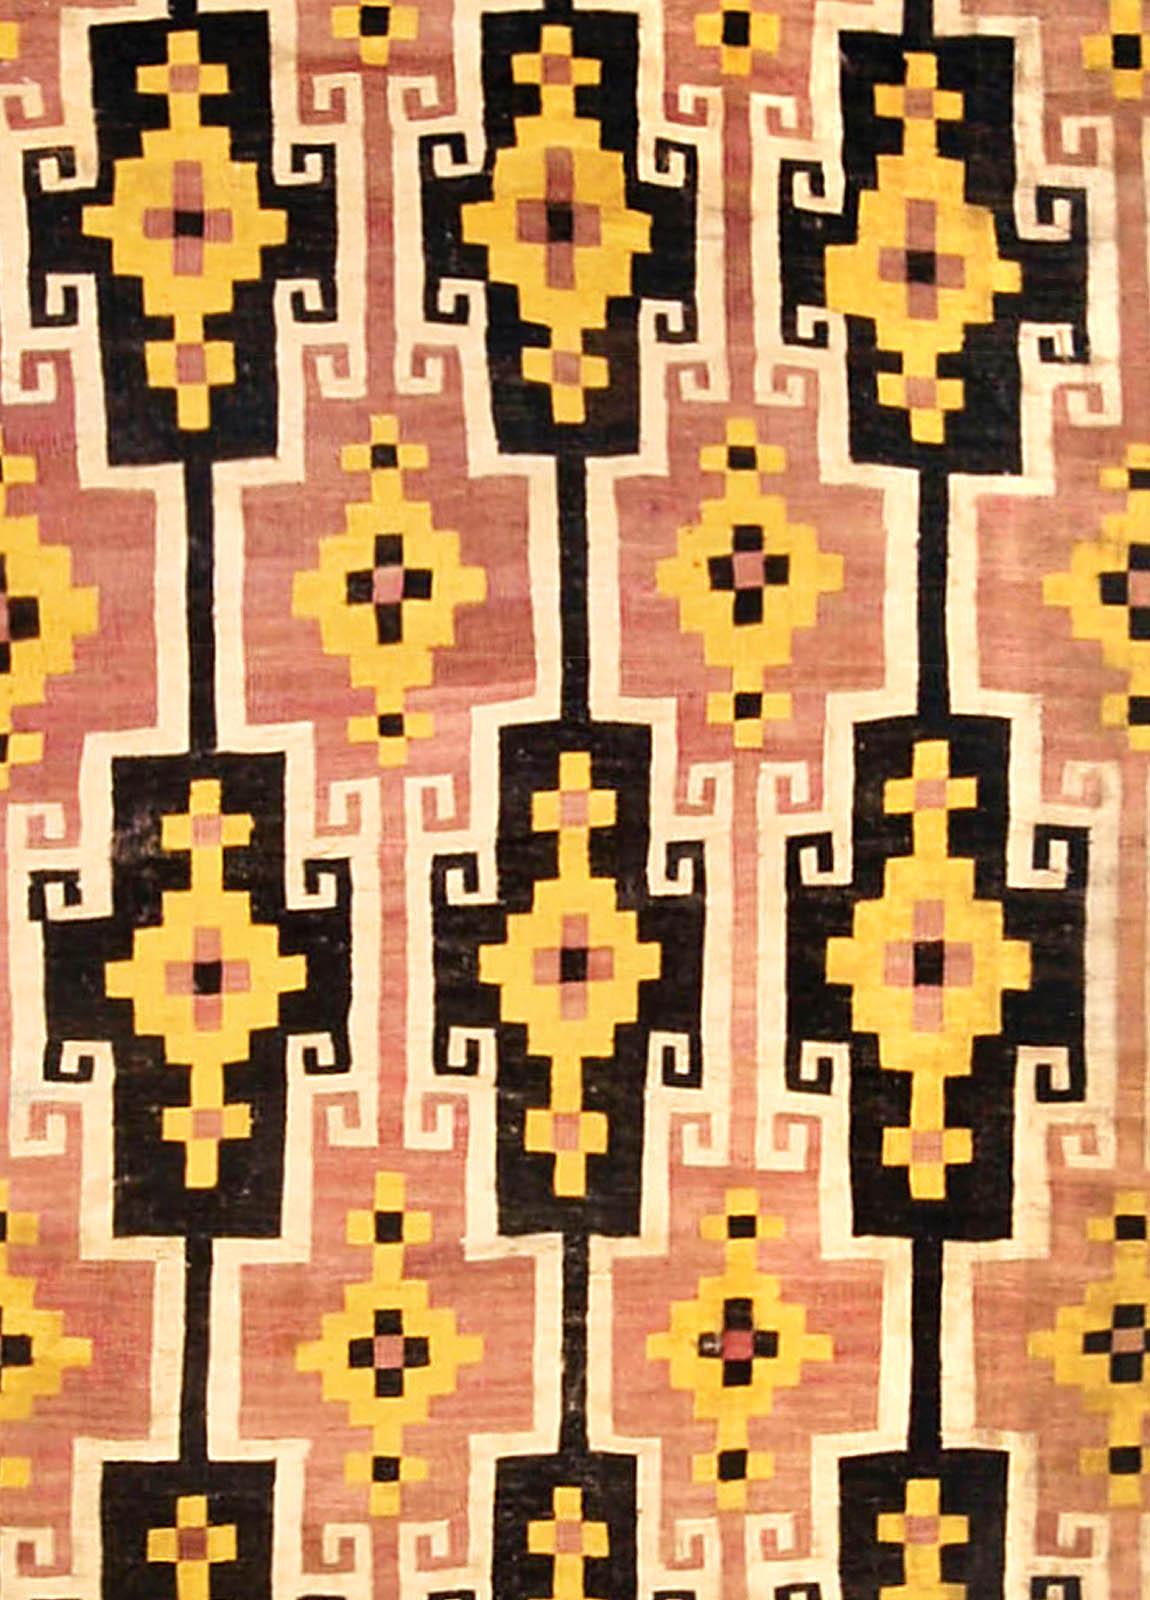 Mid-20th Century Afghan black, yellow and rose kilim wool rug
Size: 12'3